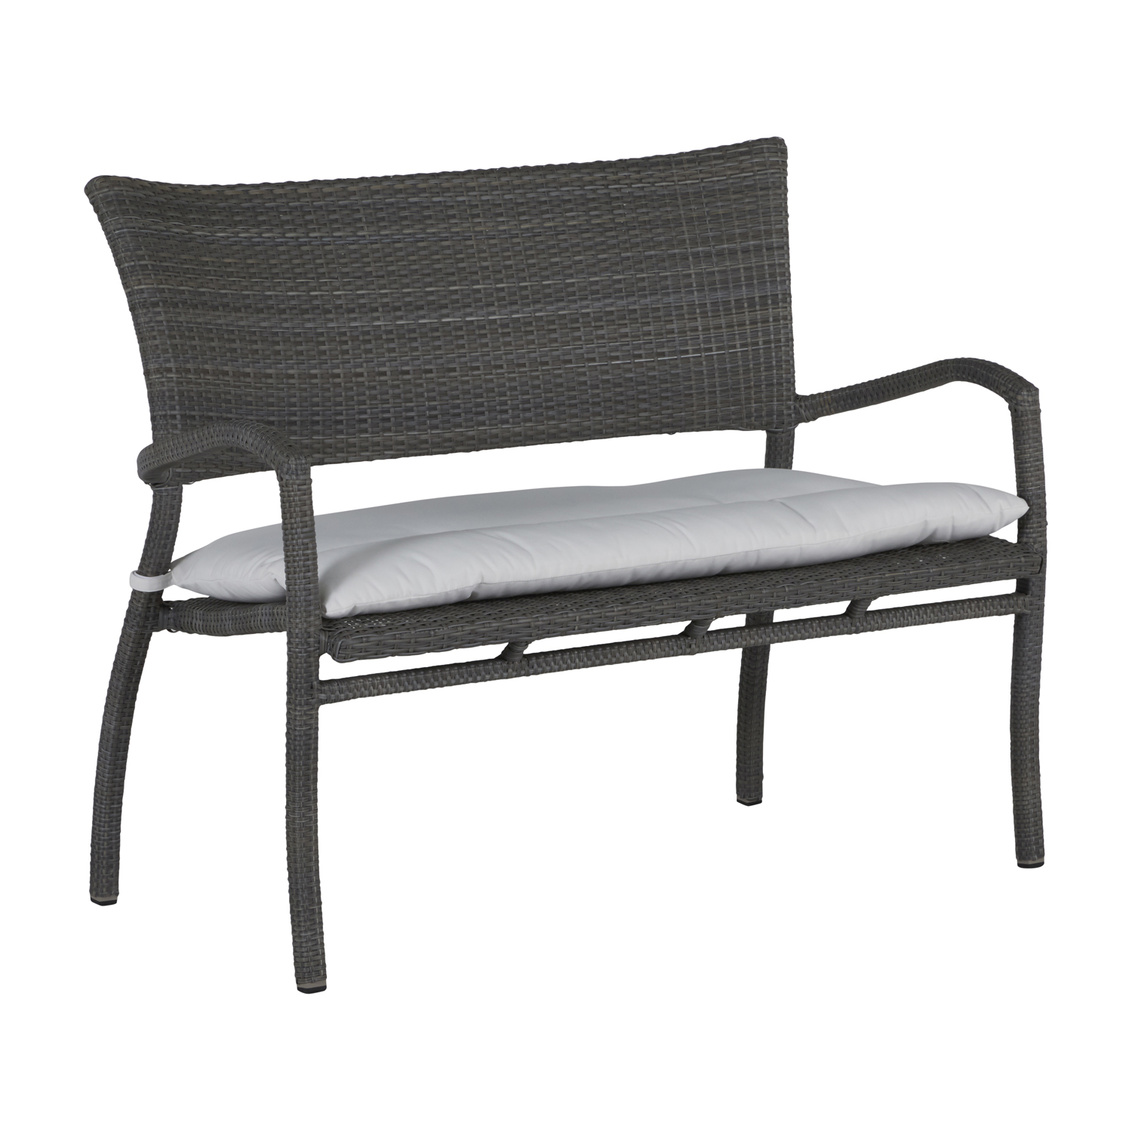 skye bench in slate grey – frame only product image